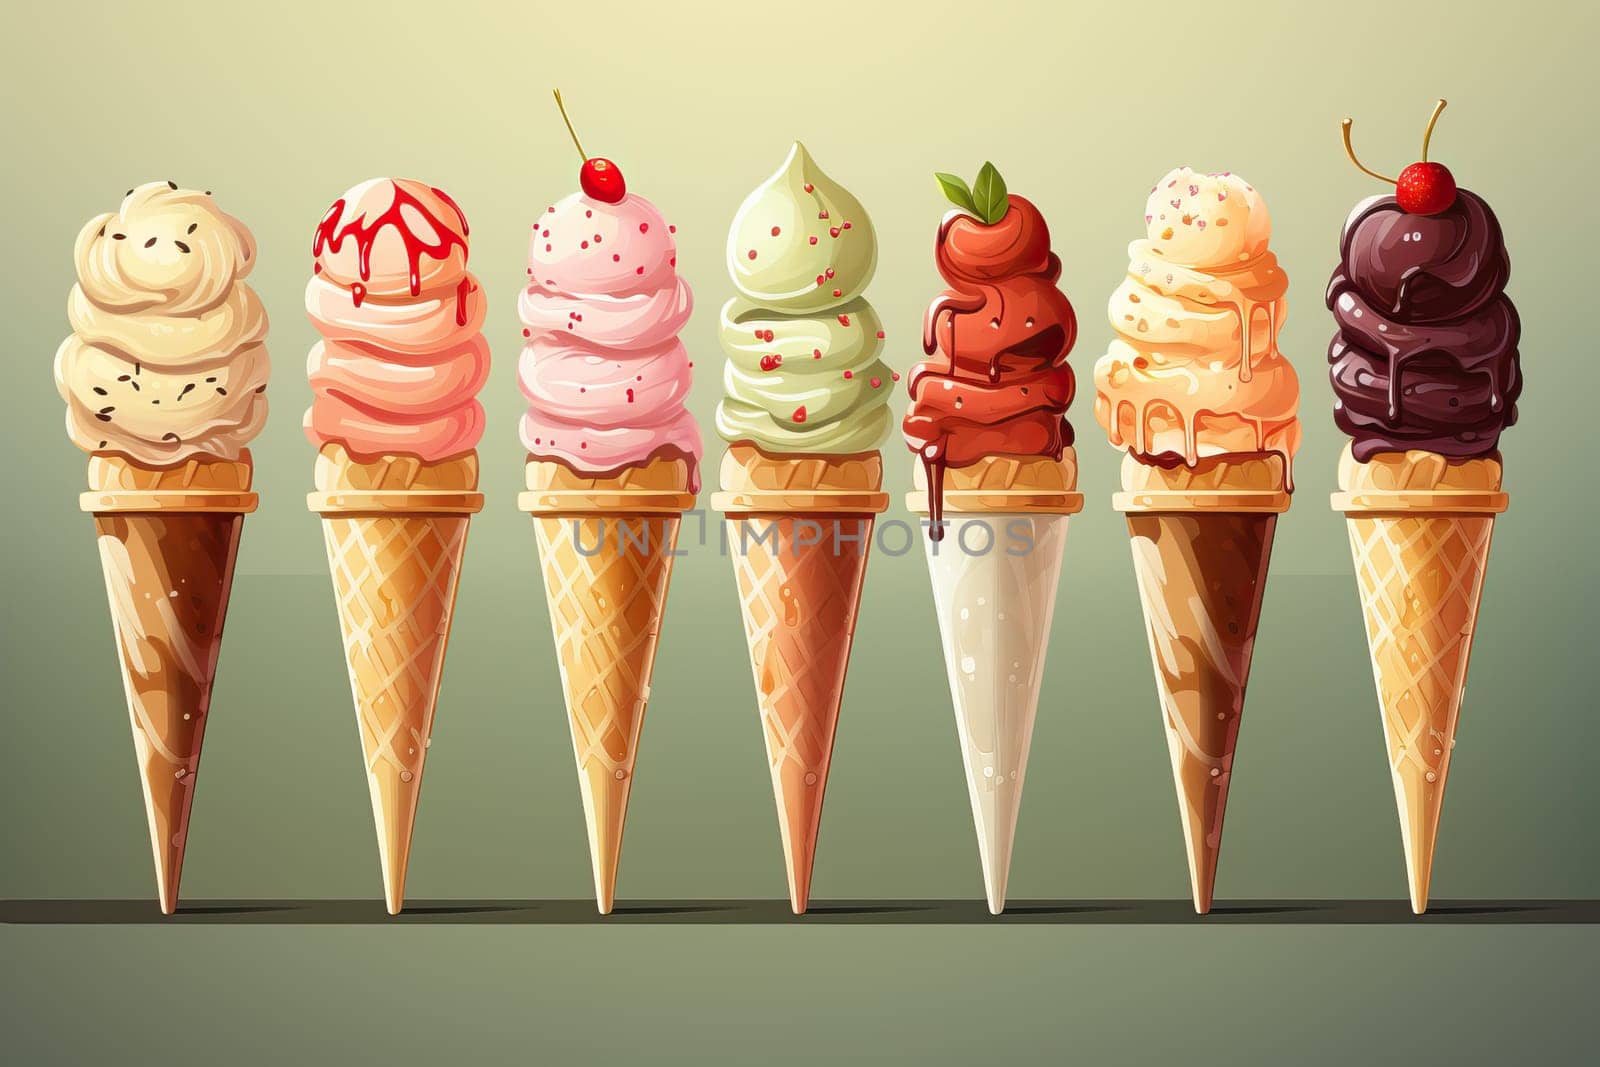 Different flavors of ice cream from a cone on a light background, a large portion of ice cream on a cone.